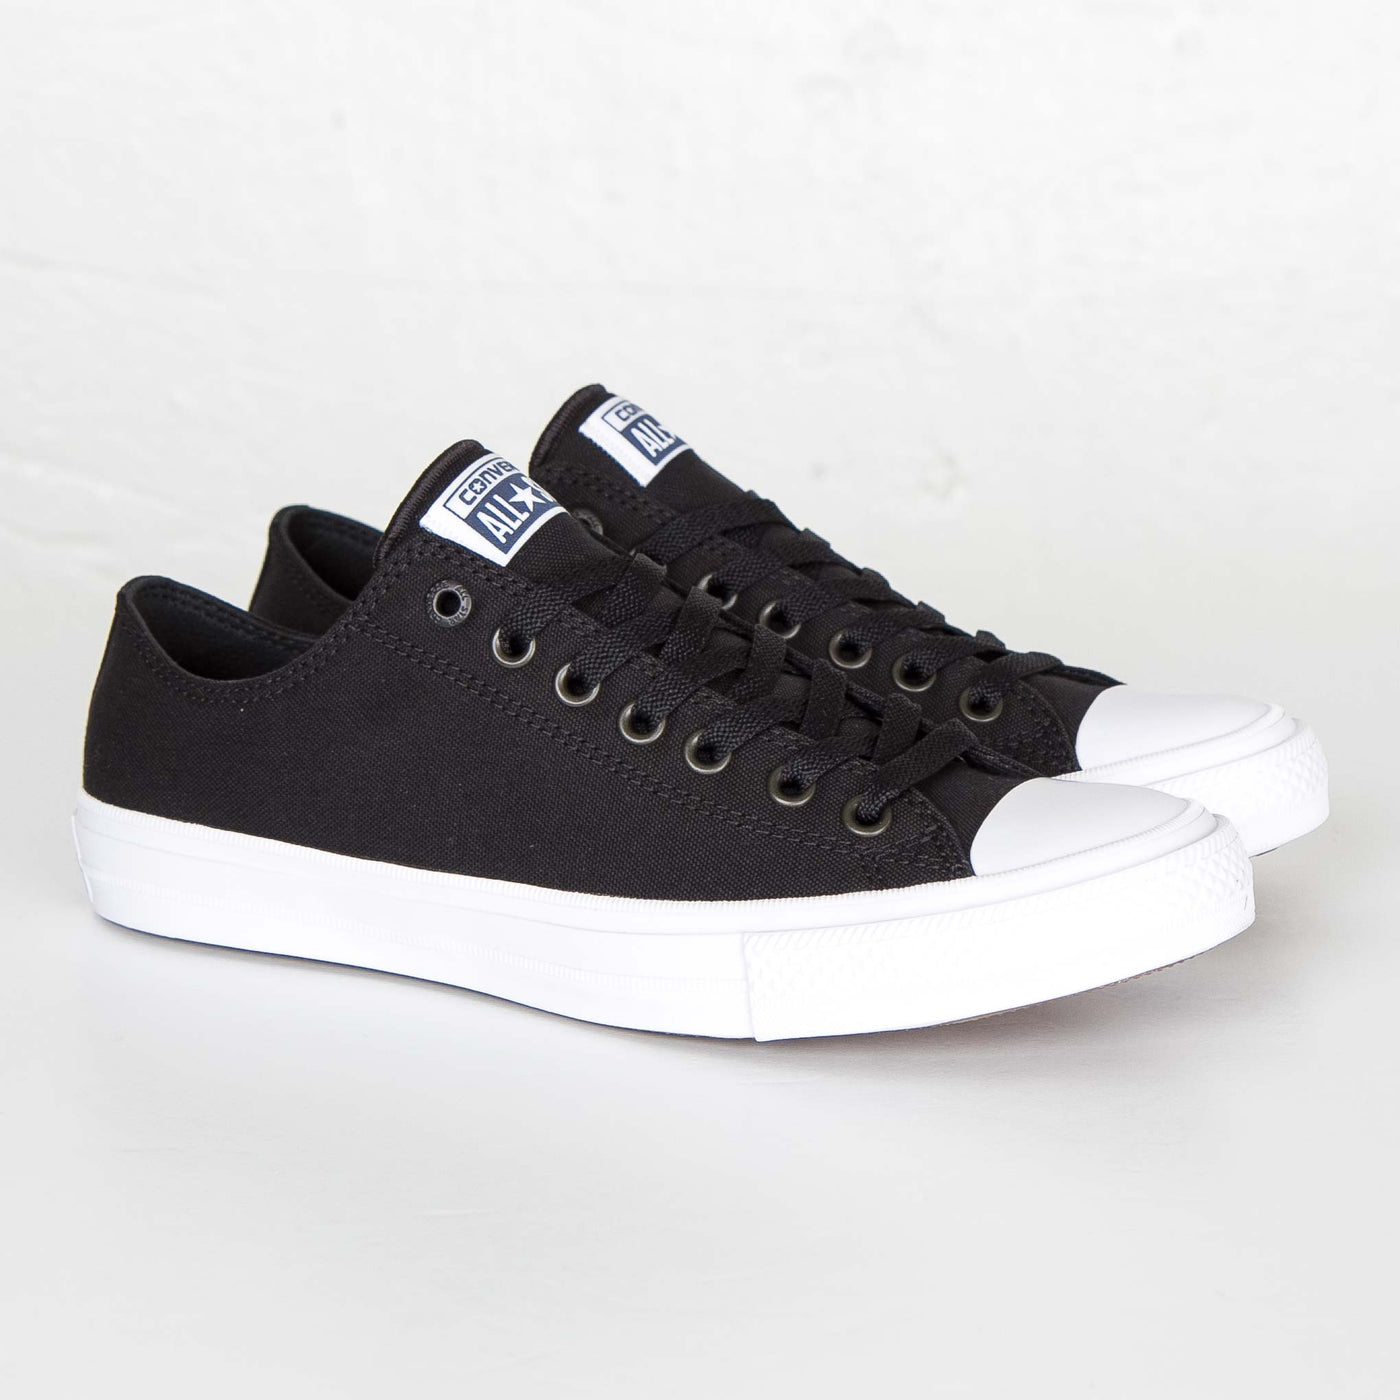 Converse Chuck Taylor All Star II OX Low Top Black – PRIVATE